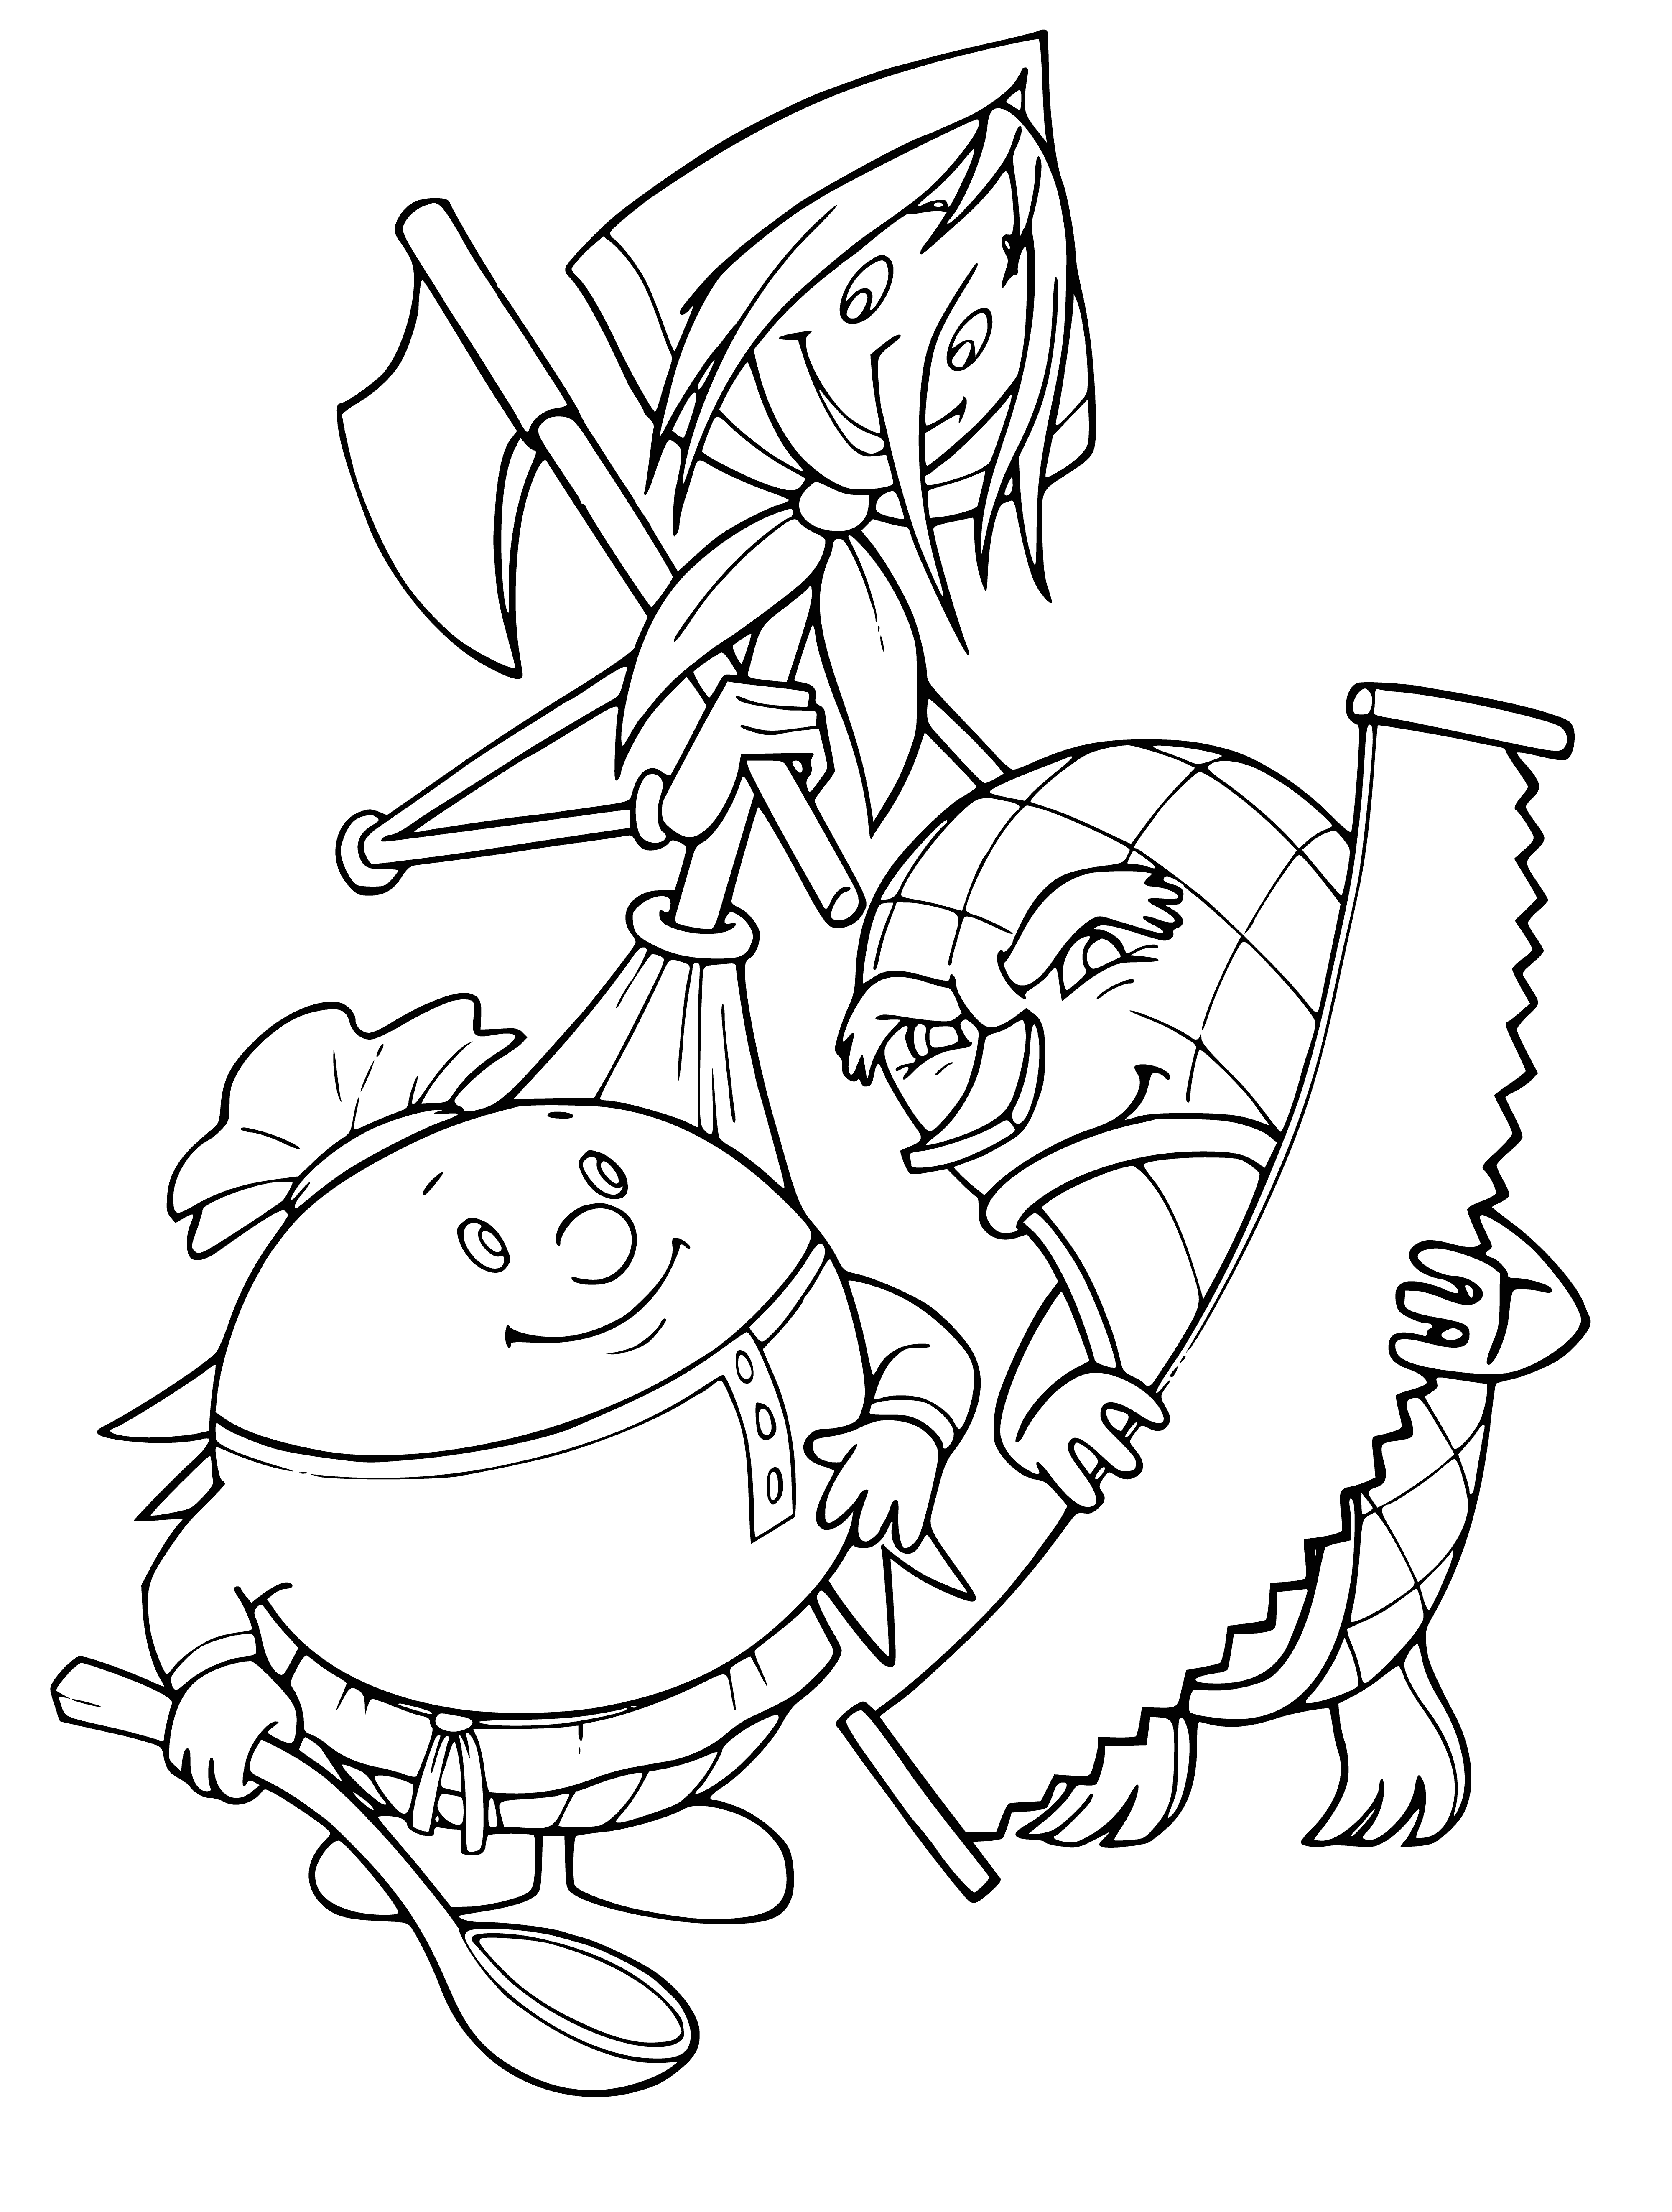 Bubble, Straw and Bast coloring page